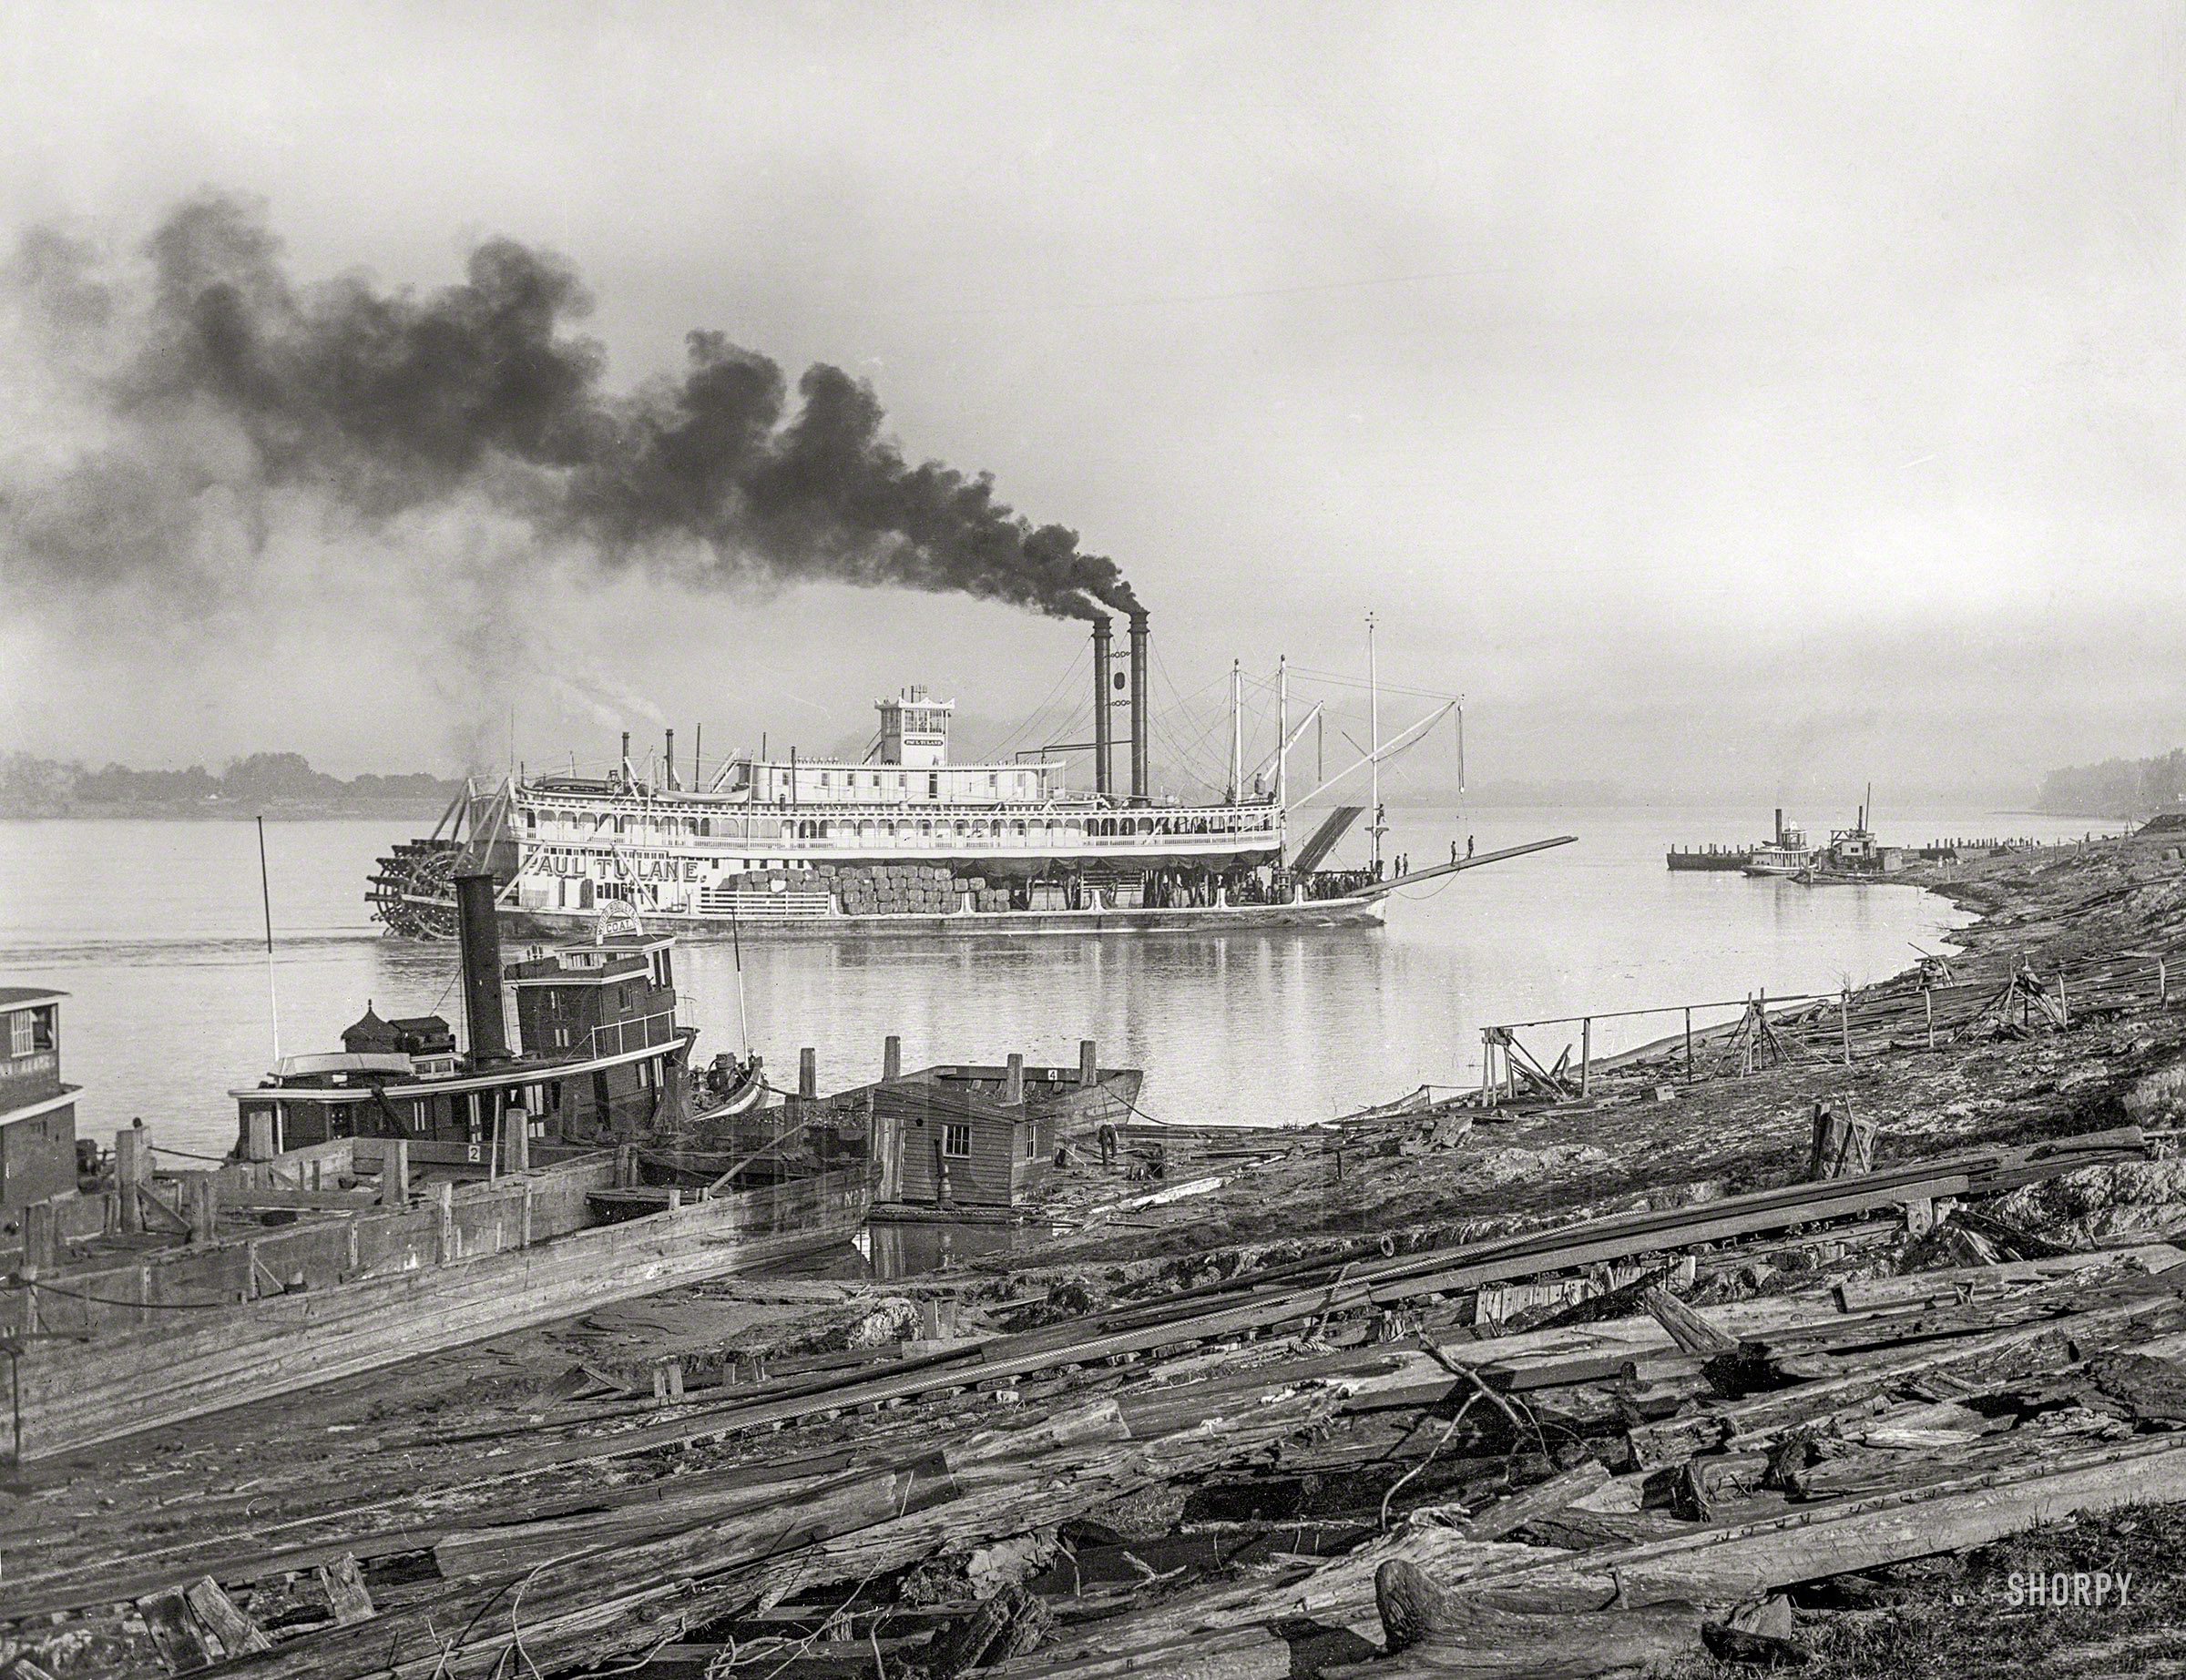 The Mississippi River circa 1910. "The levee at Baton Rouge -- sternwheeler Paul Tulane." 8x10 inch dry plate glass negative, Detroit Publishing Company. View full size.